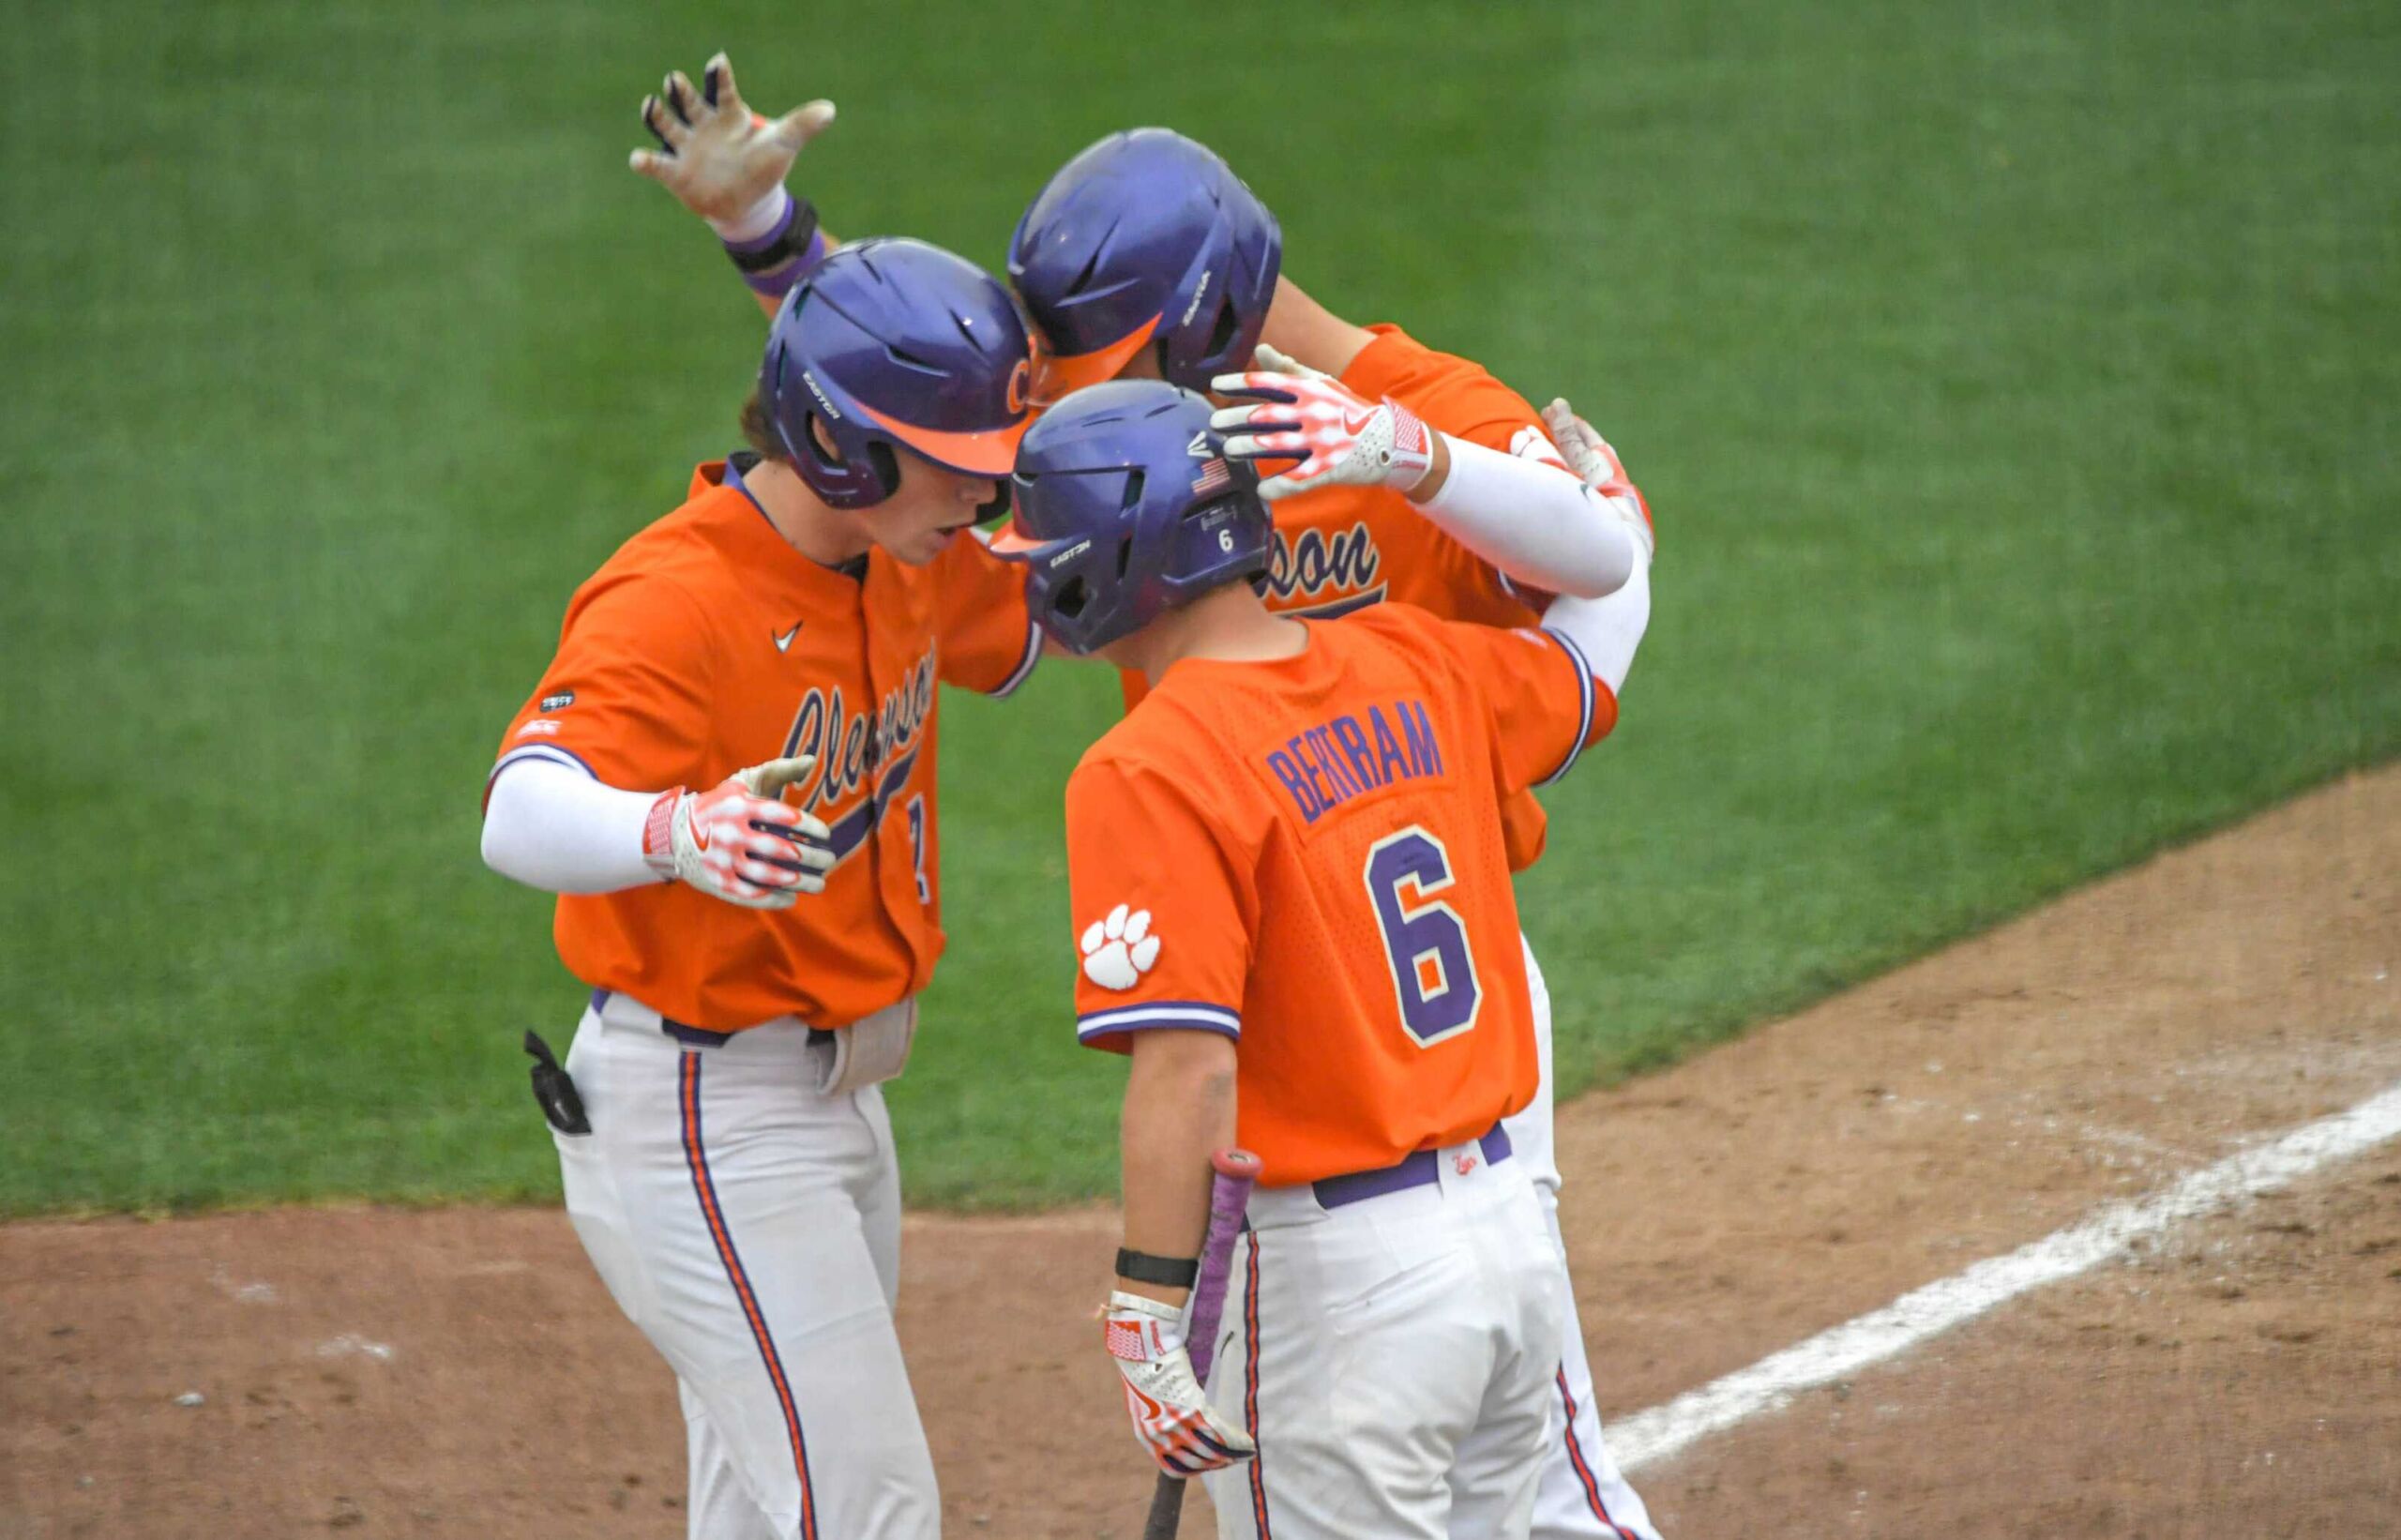 Clemson-Boston College baseball: Score from Game 3 of ACC series